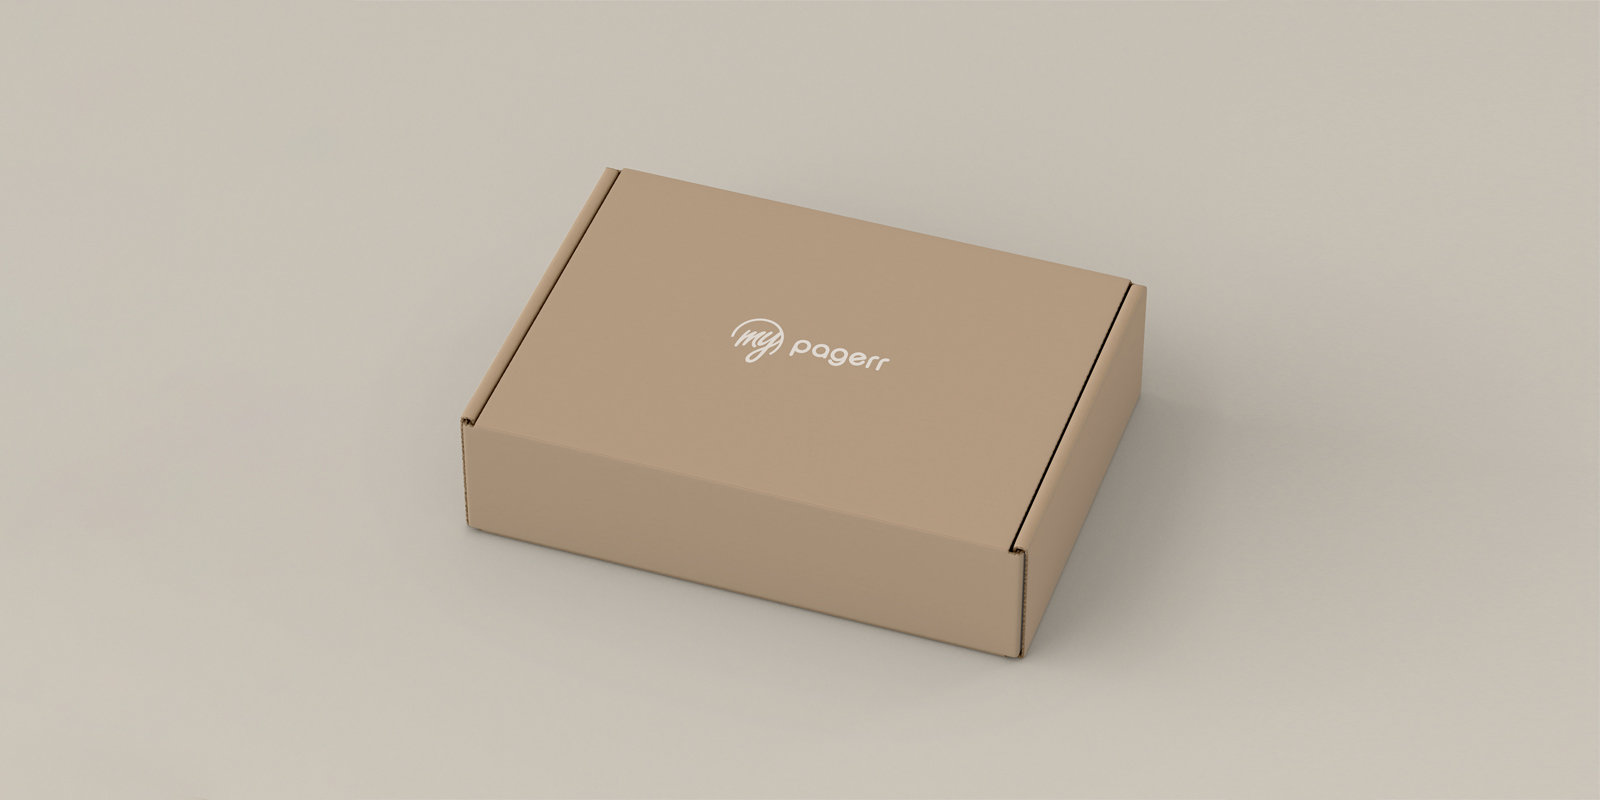 Bespoke boxes in Toowoomba - Print with Pagerr